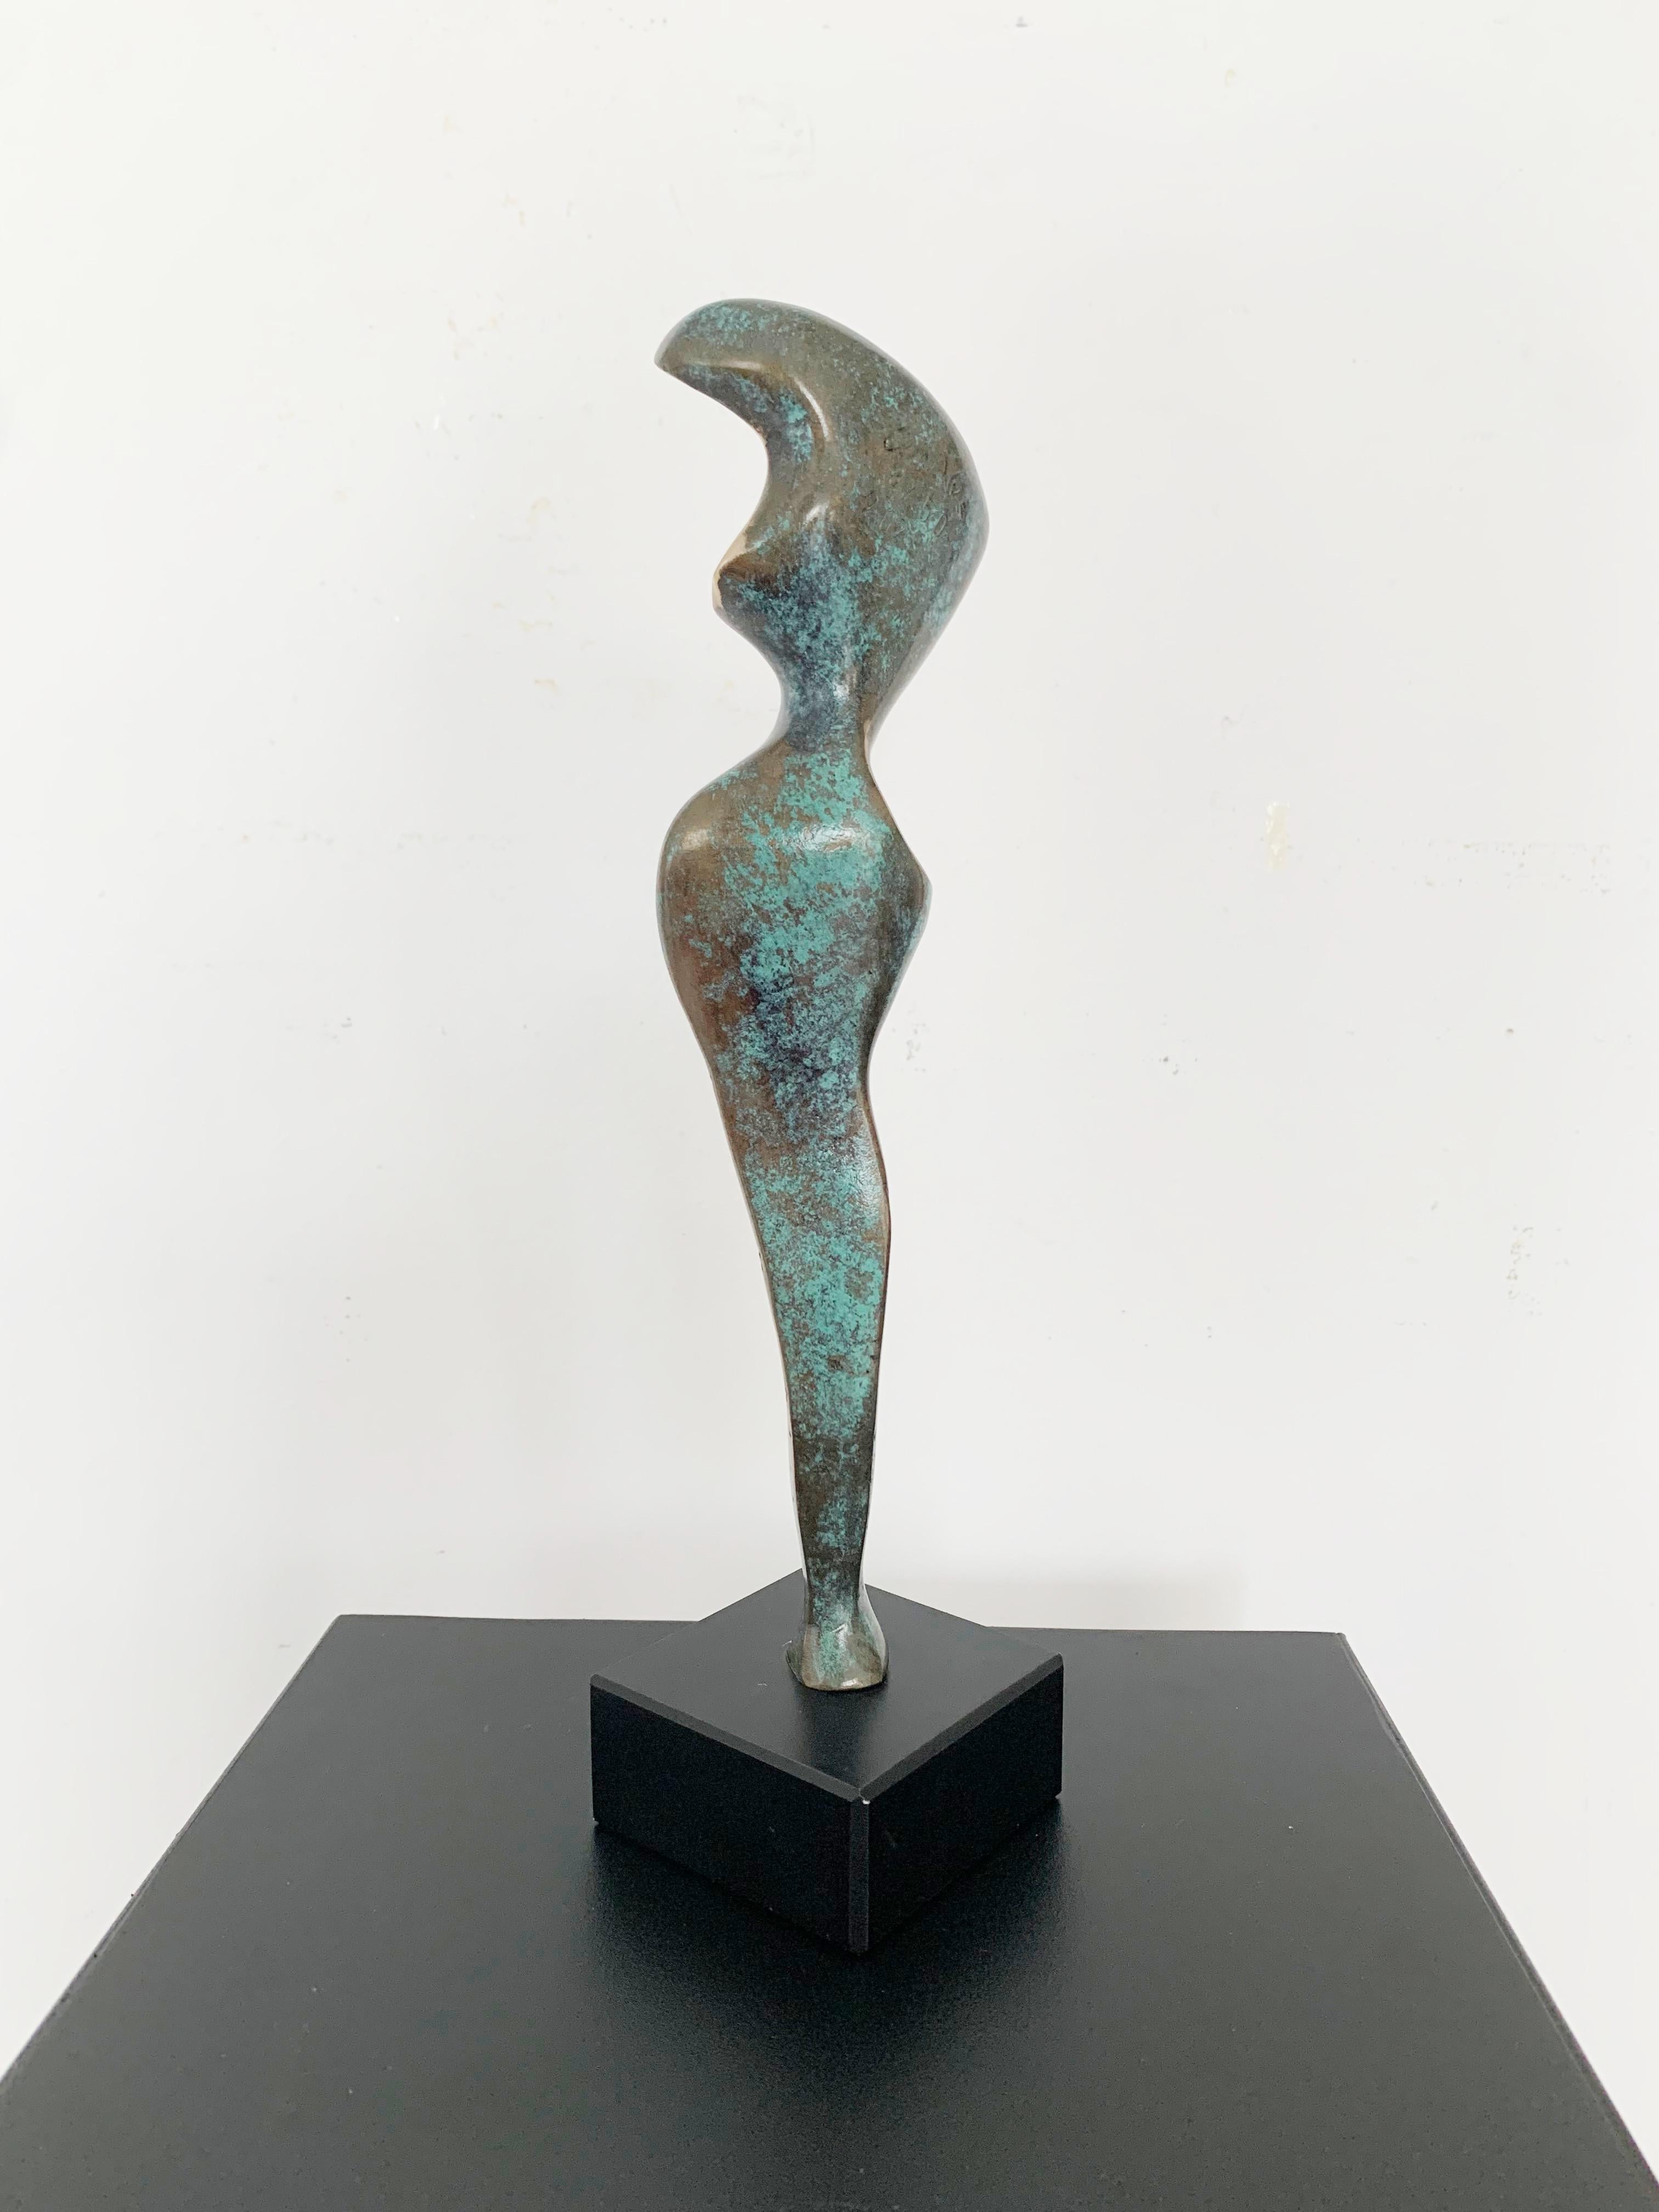 Contemporary bronze sculpture on marble base by Polish artist Stan Wysocki. Artwork comes from limited edition of 50. Sculpture depicts female figure filtered through geometric, synthesizing style. Artist uses patina very consciously as an artistic